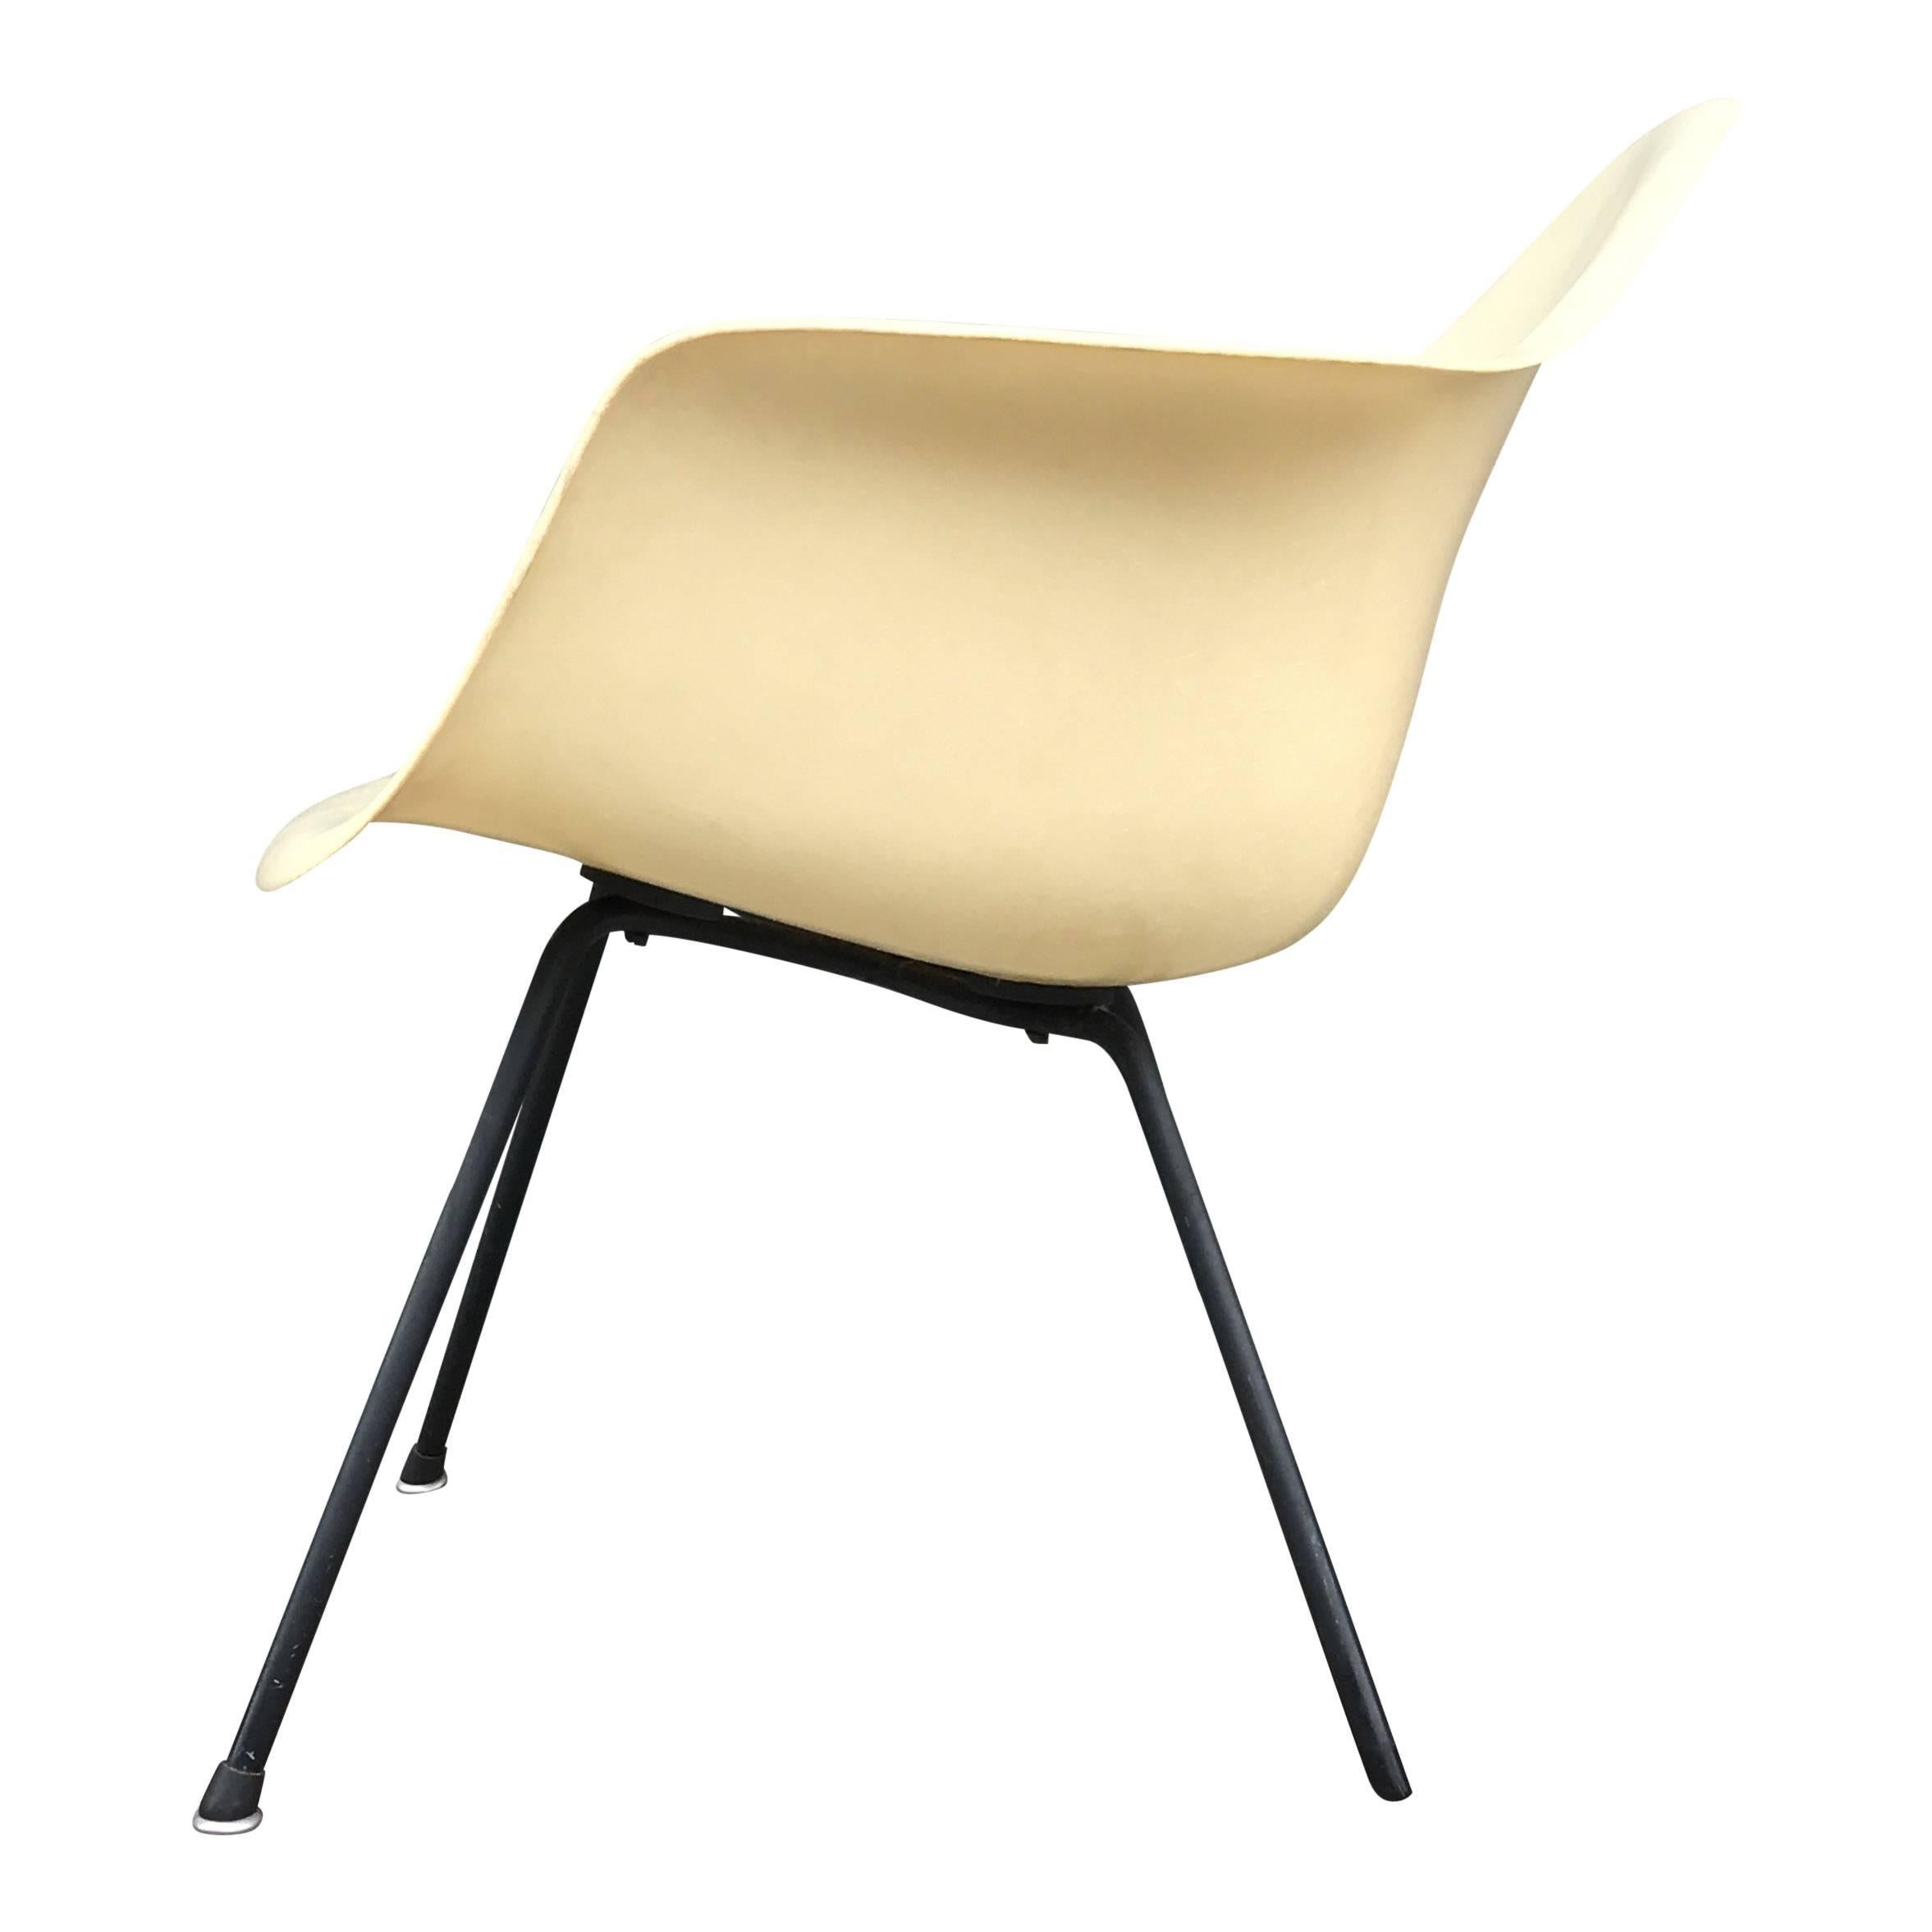 Up for sale is an early Eames / Zenith Plastics armchairs, in parchment color on an X-base. Zenith Plastics was the first producer to mold the shells for Herman Miller. 

The chair is in good vintage shape, with only minor wear to the fiberglass